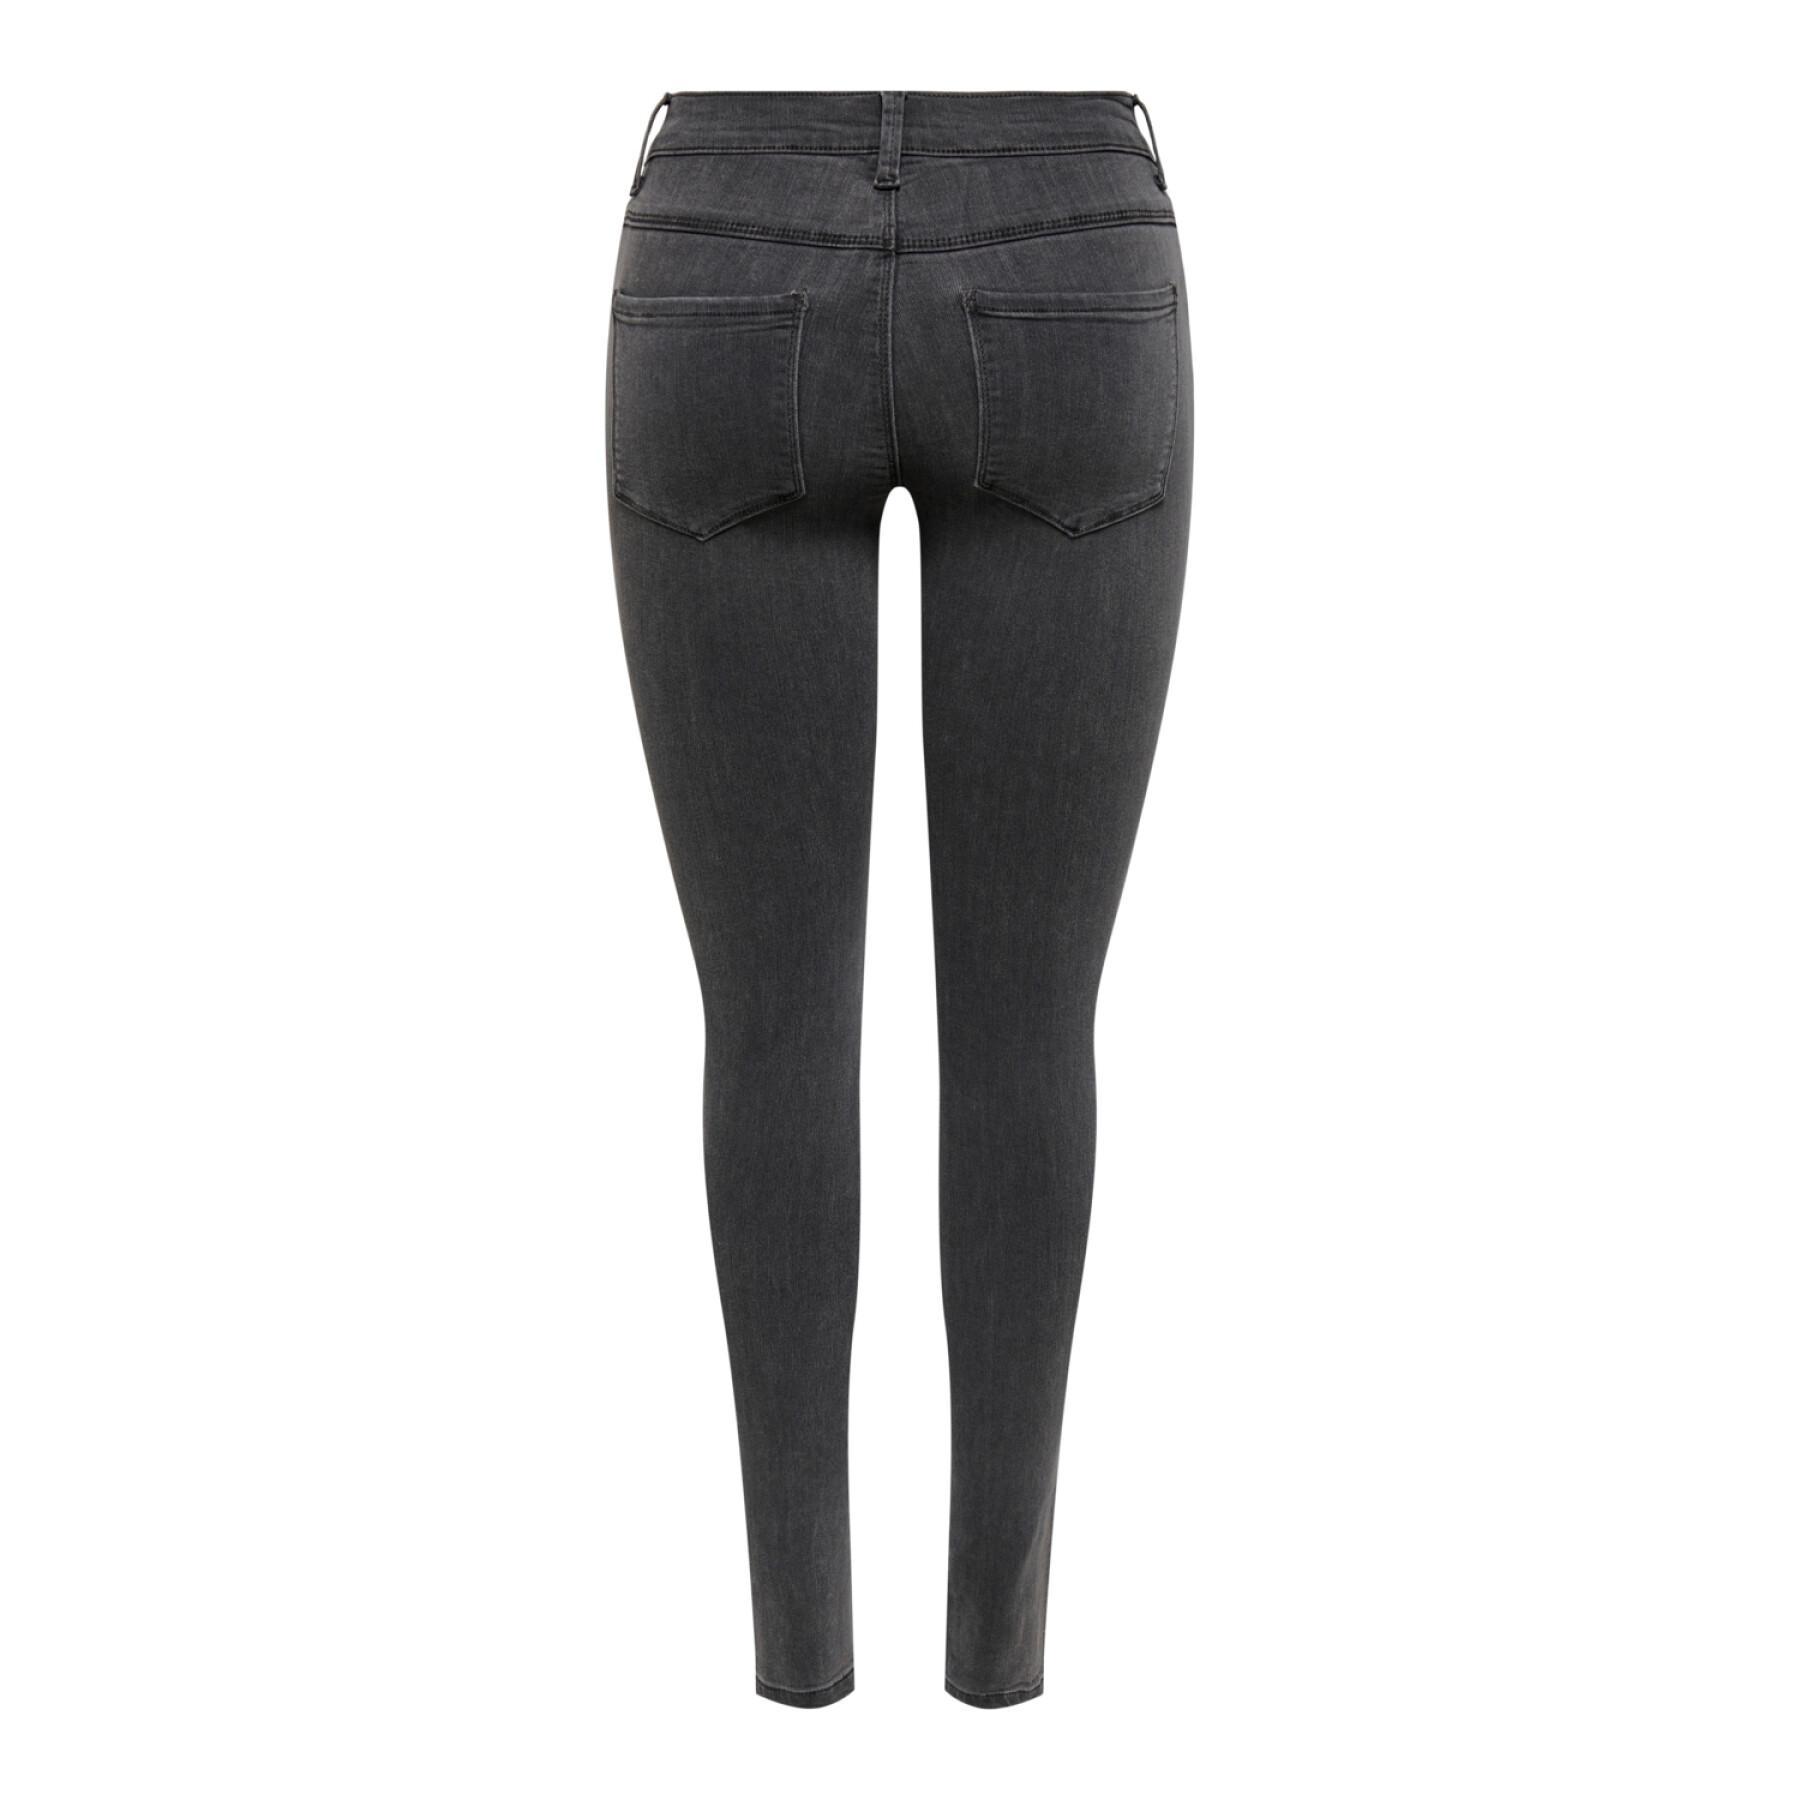 Women's skinny jeans Only onlrain life